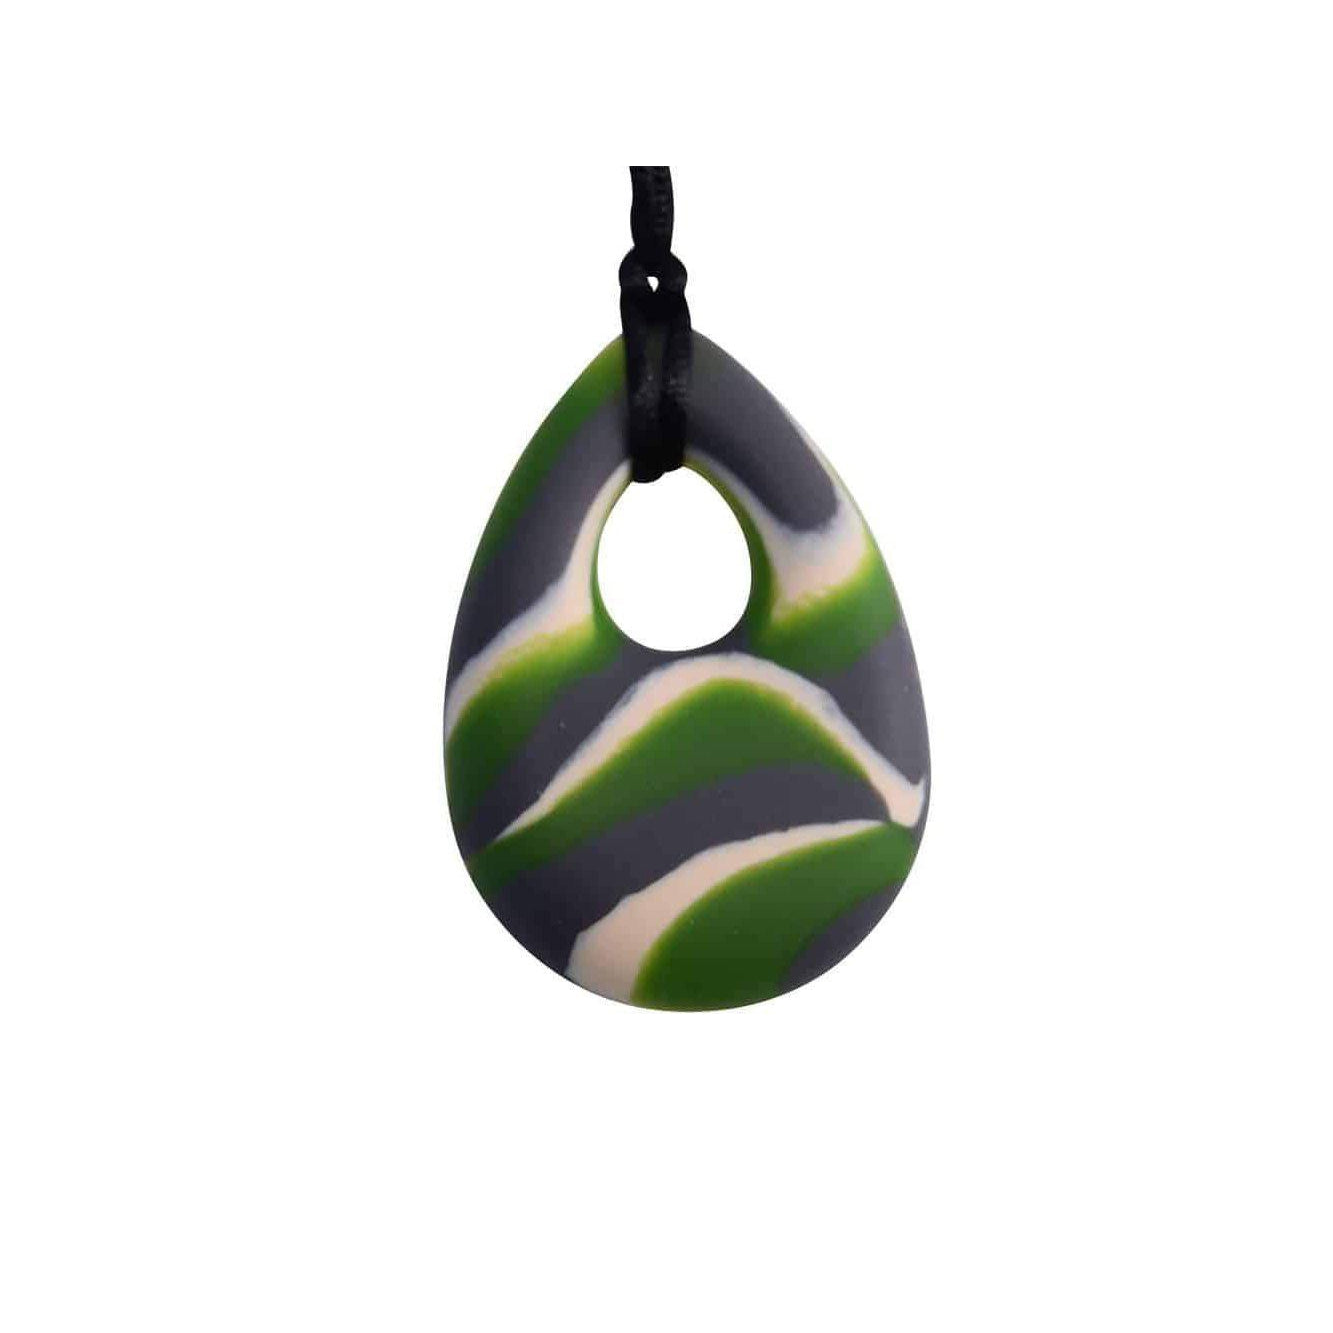 Sensory Chew Necklace For Kids And Adults - Safe, Non-toxic And Stylish -  Reduces Anxiety And Stress - Autism And Adhd Chewable Necklace | Fruugo BH